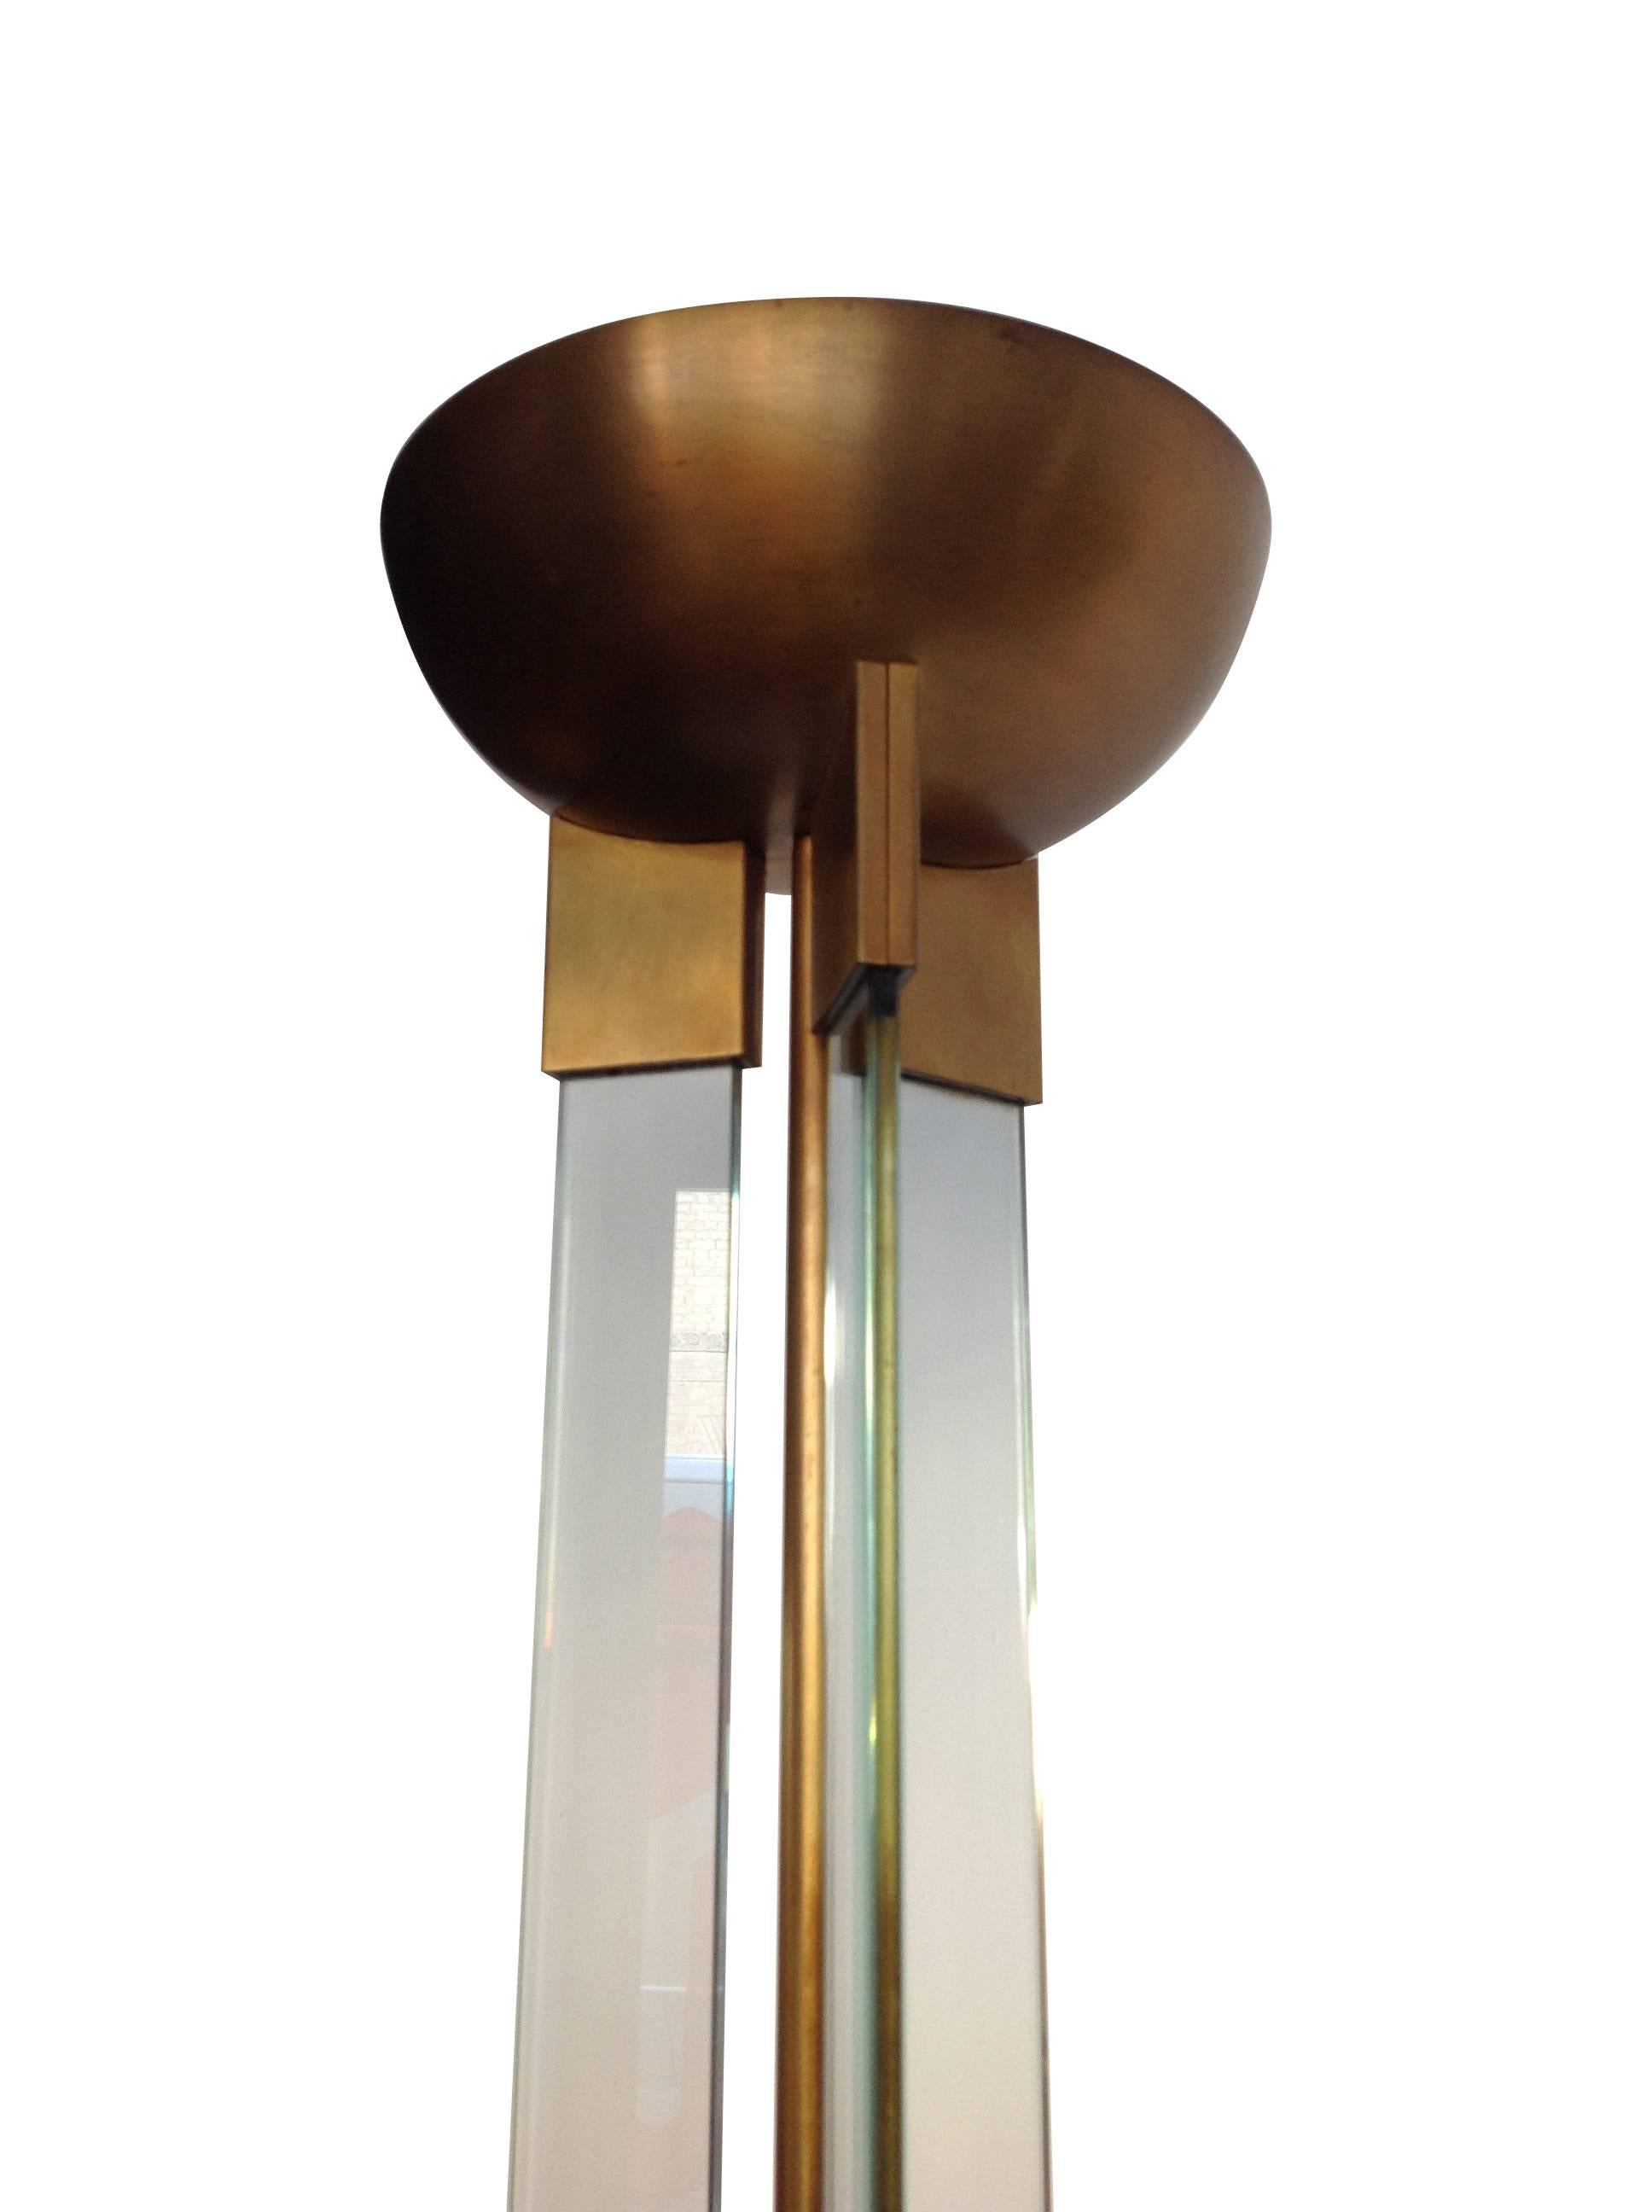 An Art Deco style brass and glass floor lamp, with circular brass base, supporting a brass central stem surrounded by three glass columns. In the top bowl is a halogen uplighter, re-wired with antique cord black flex, floor switch or dimmer and PAT